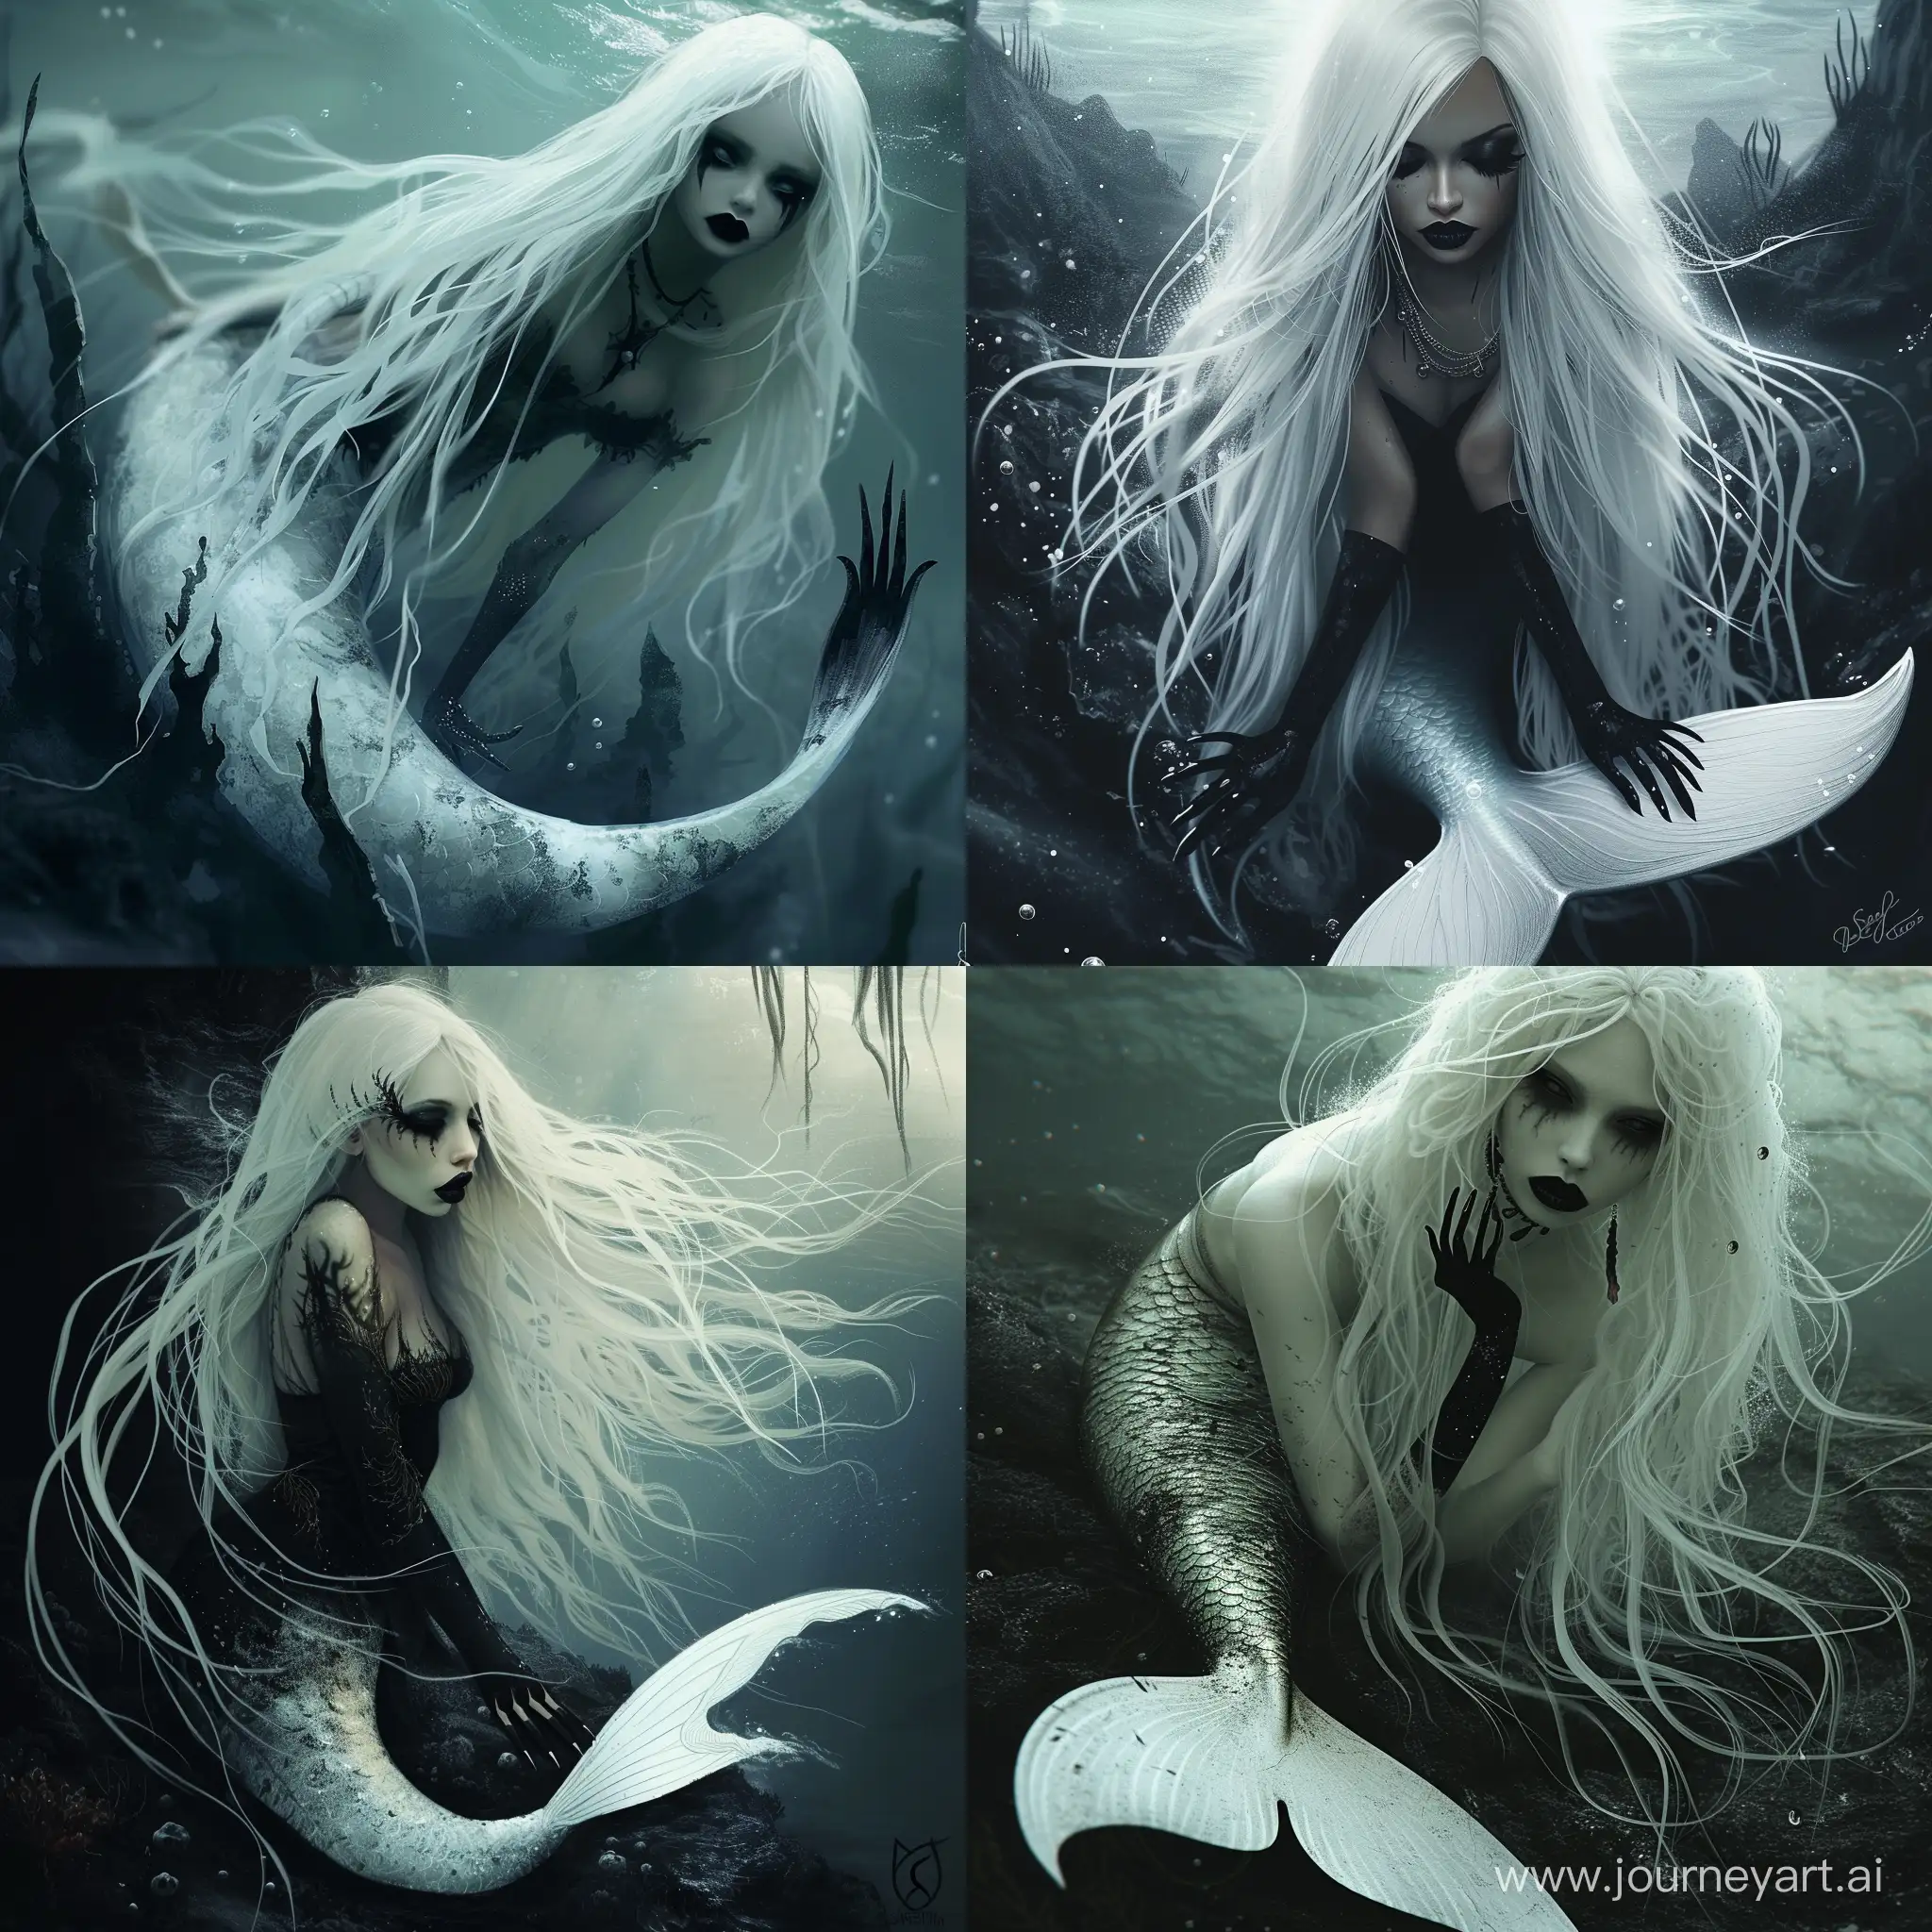 Mermaid with long white hair, black lips, her nails are black, her tail is white, she is at the bottom of the dark and gloomy ocean dark fantasy art style, not realistic